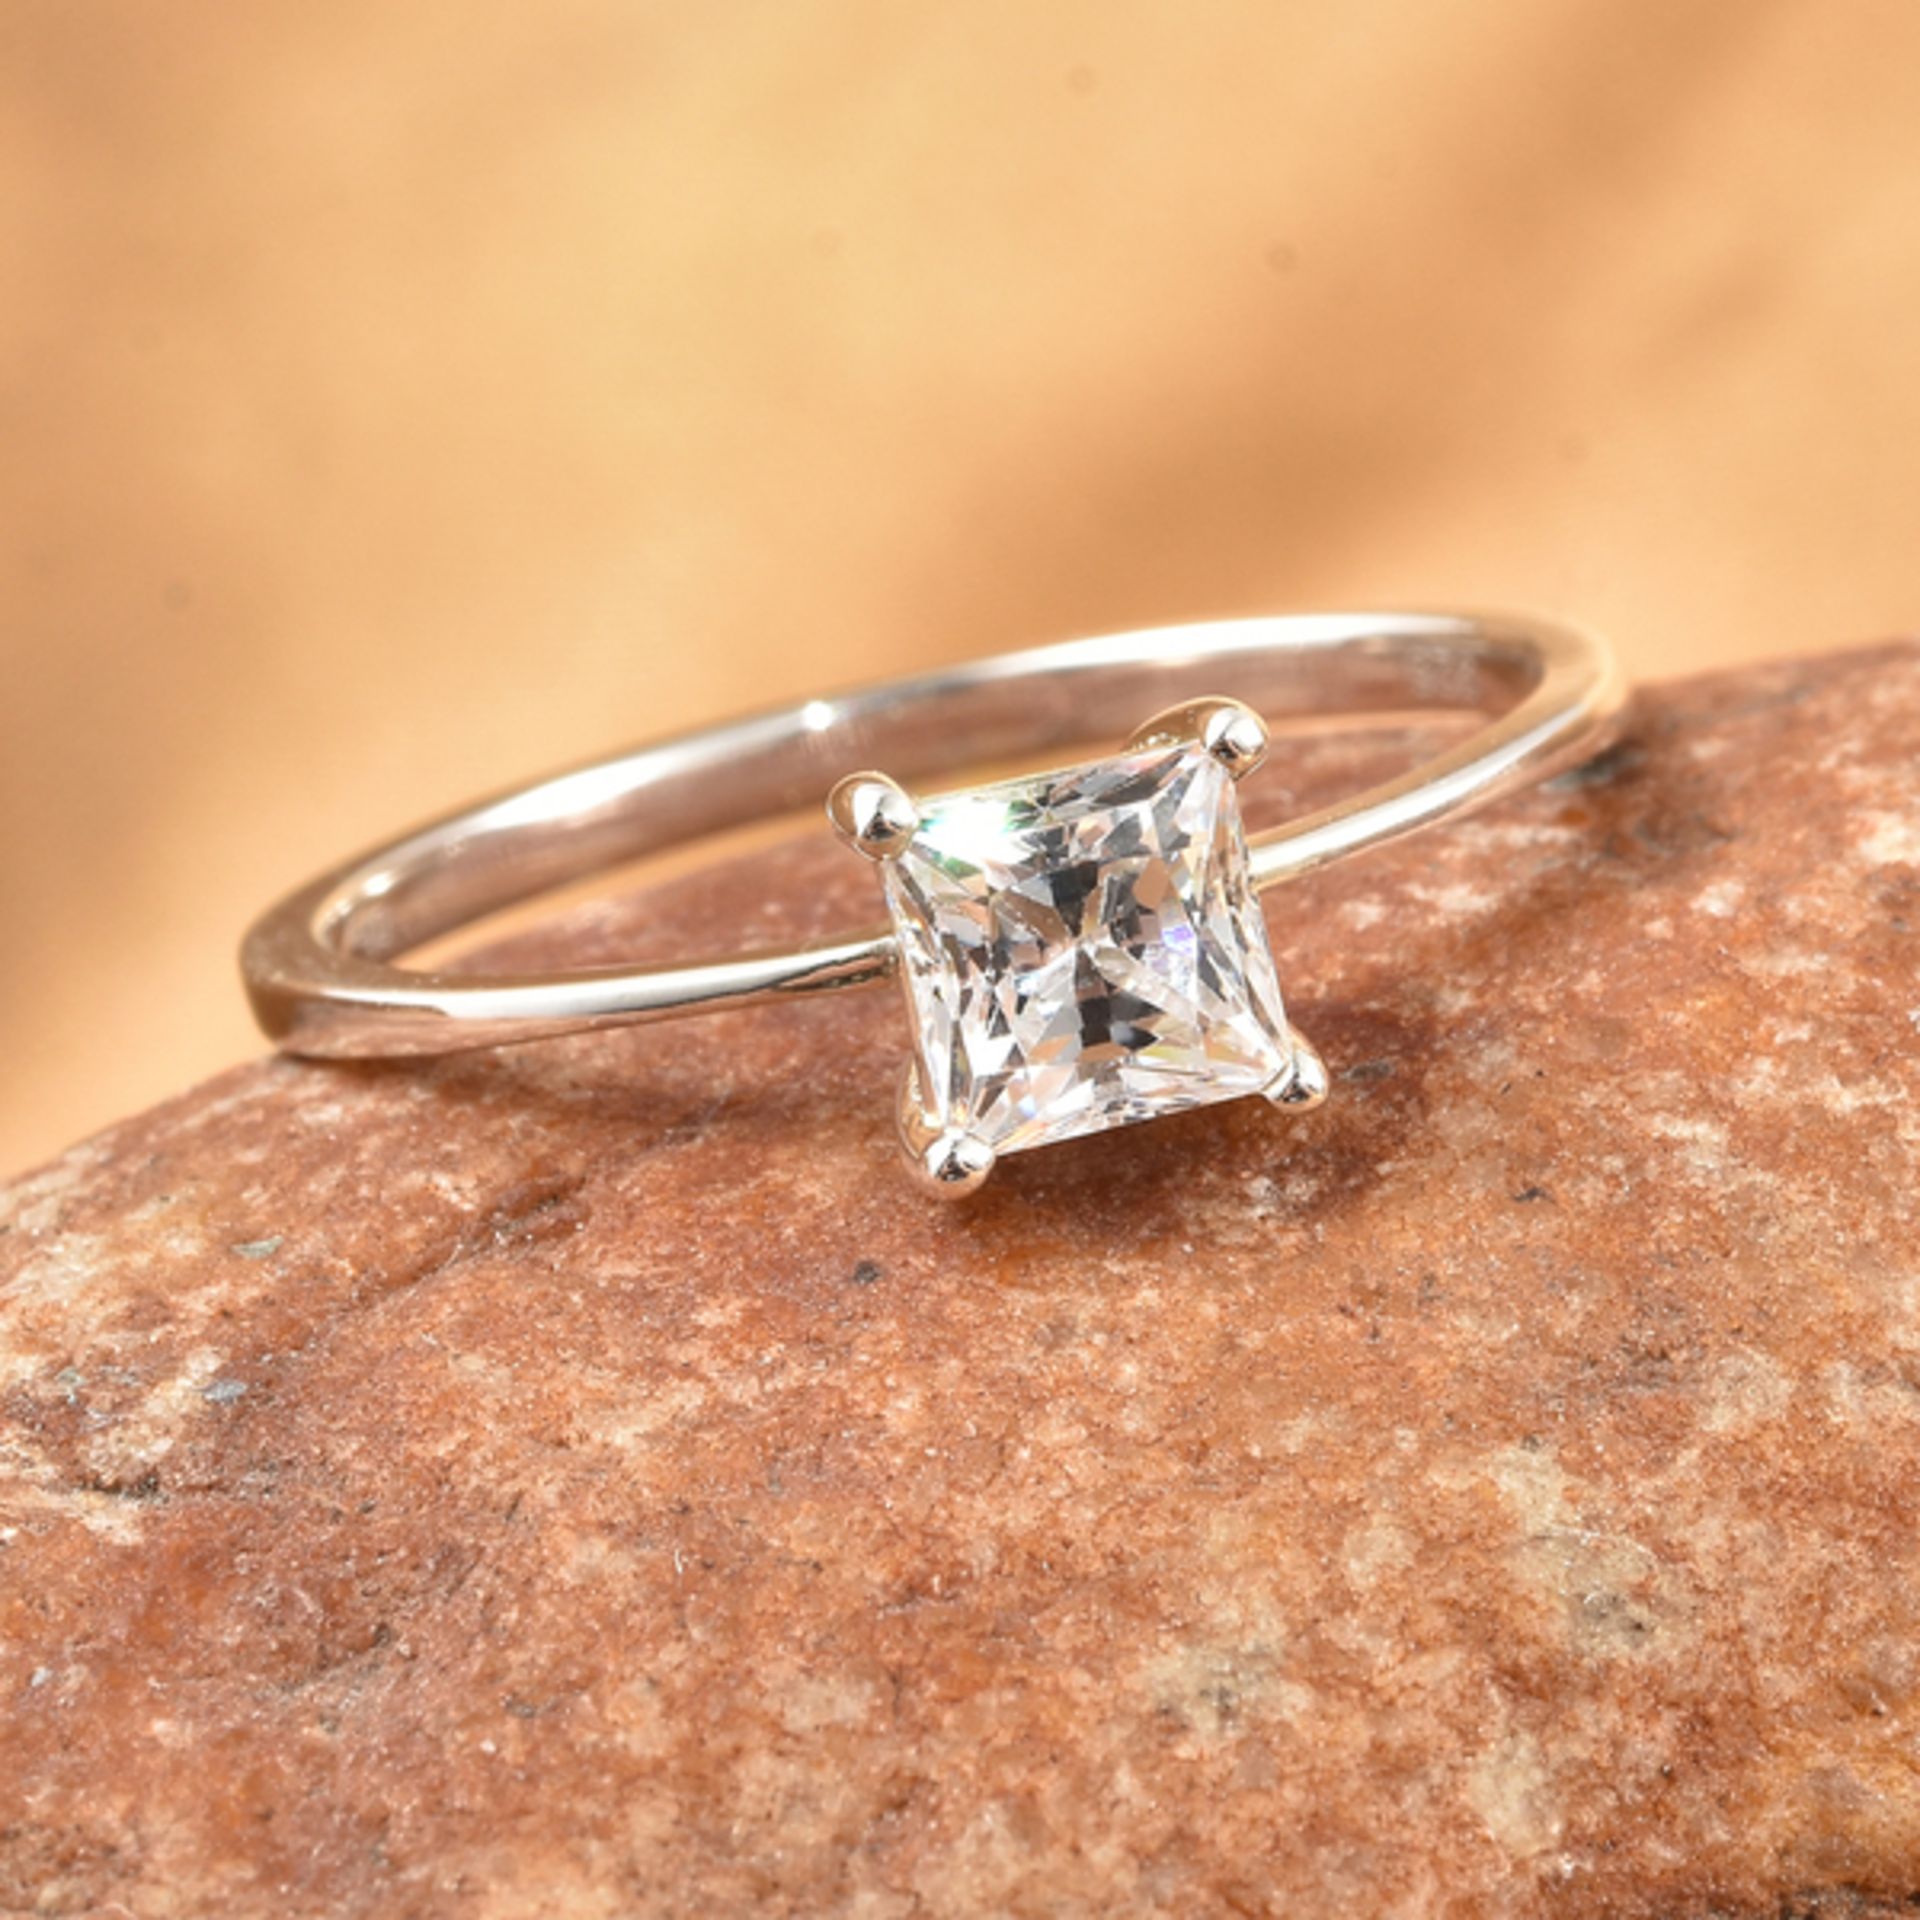 NEW!! J Francis Sterling Silver Solitaire Ring Made with SWAROVSKI ZIRCONIA